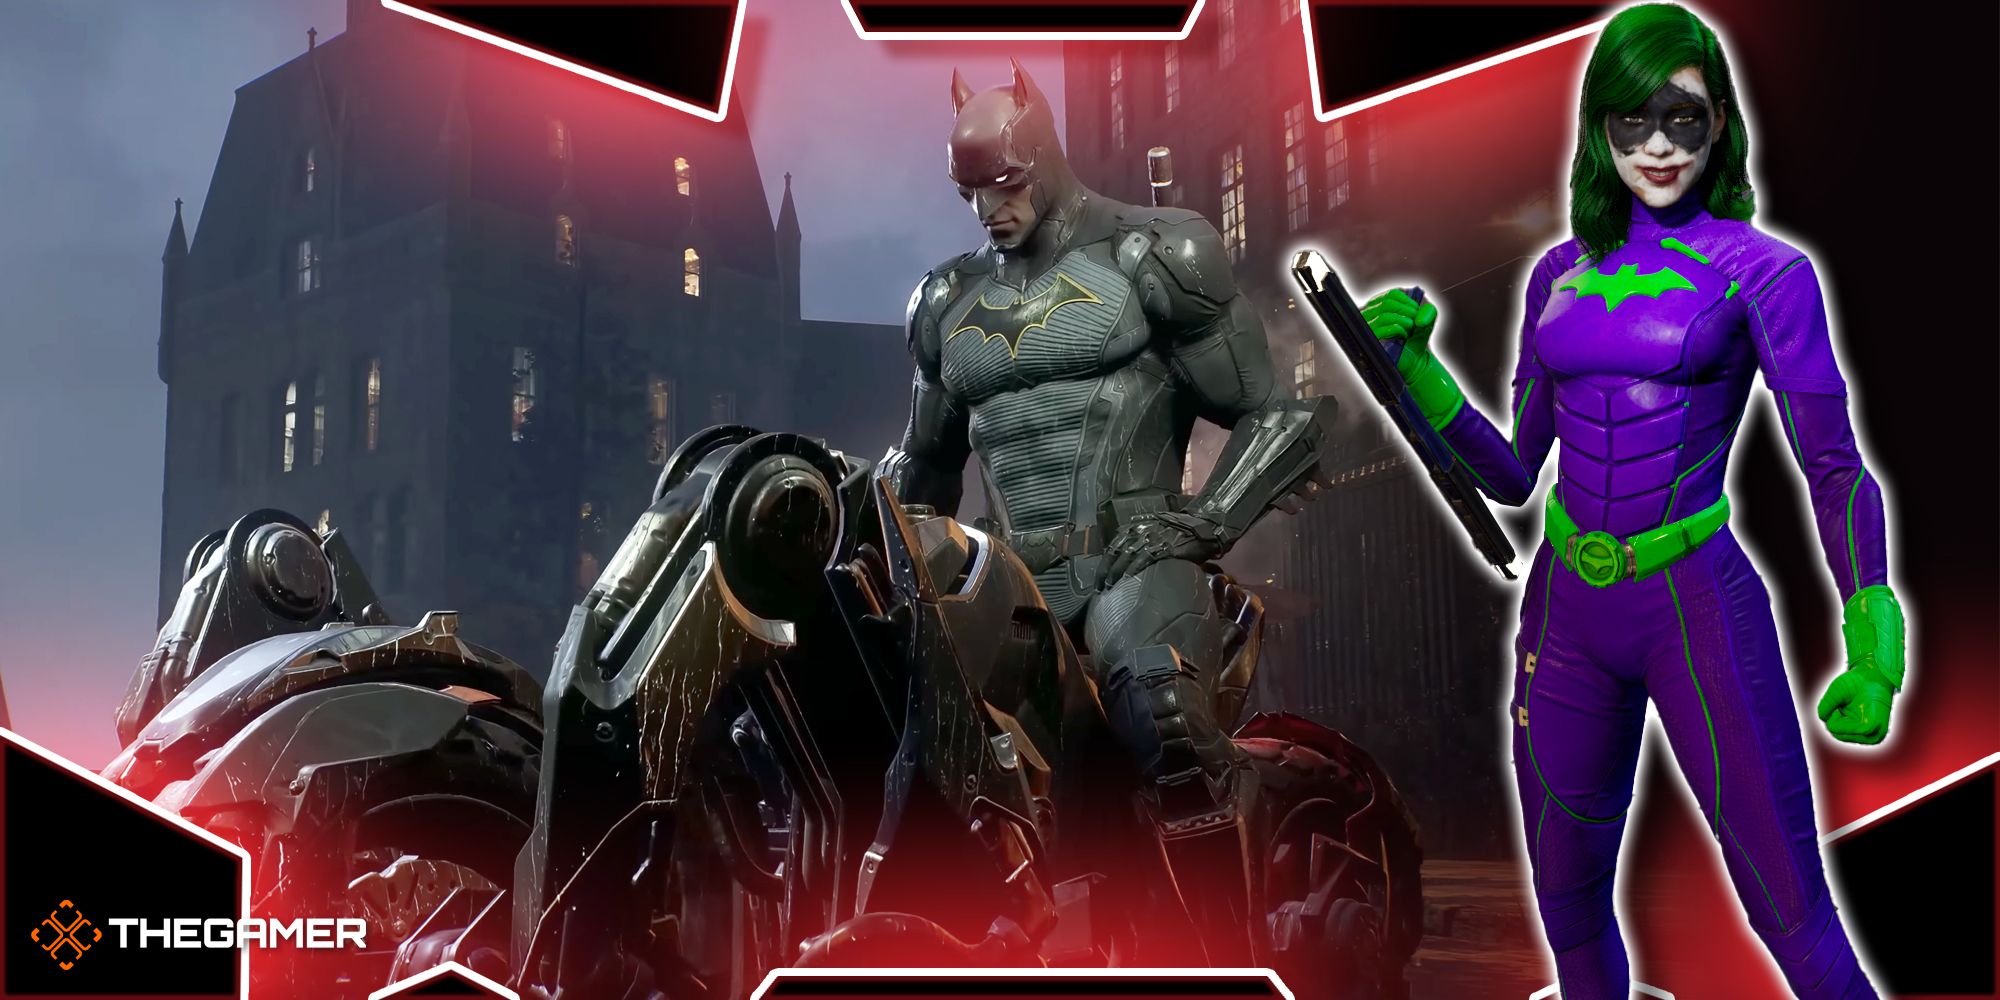 Gotham Knights is not a Game as a Service, no level gating, start